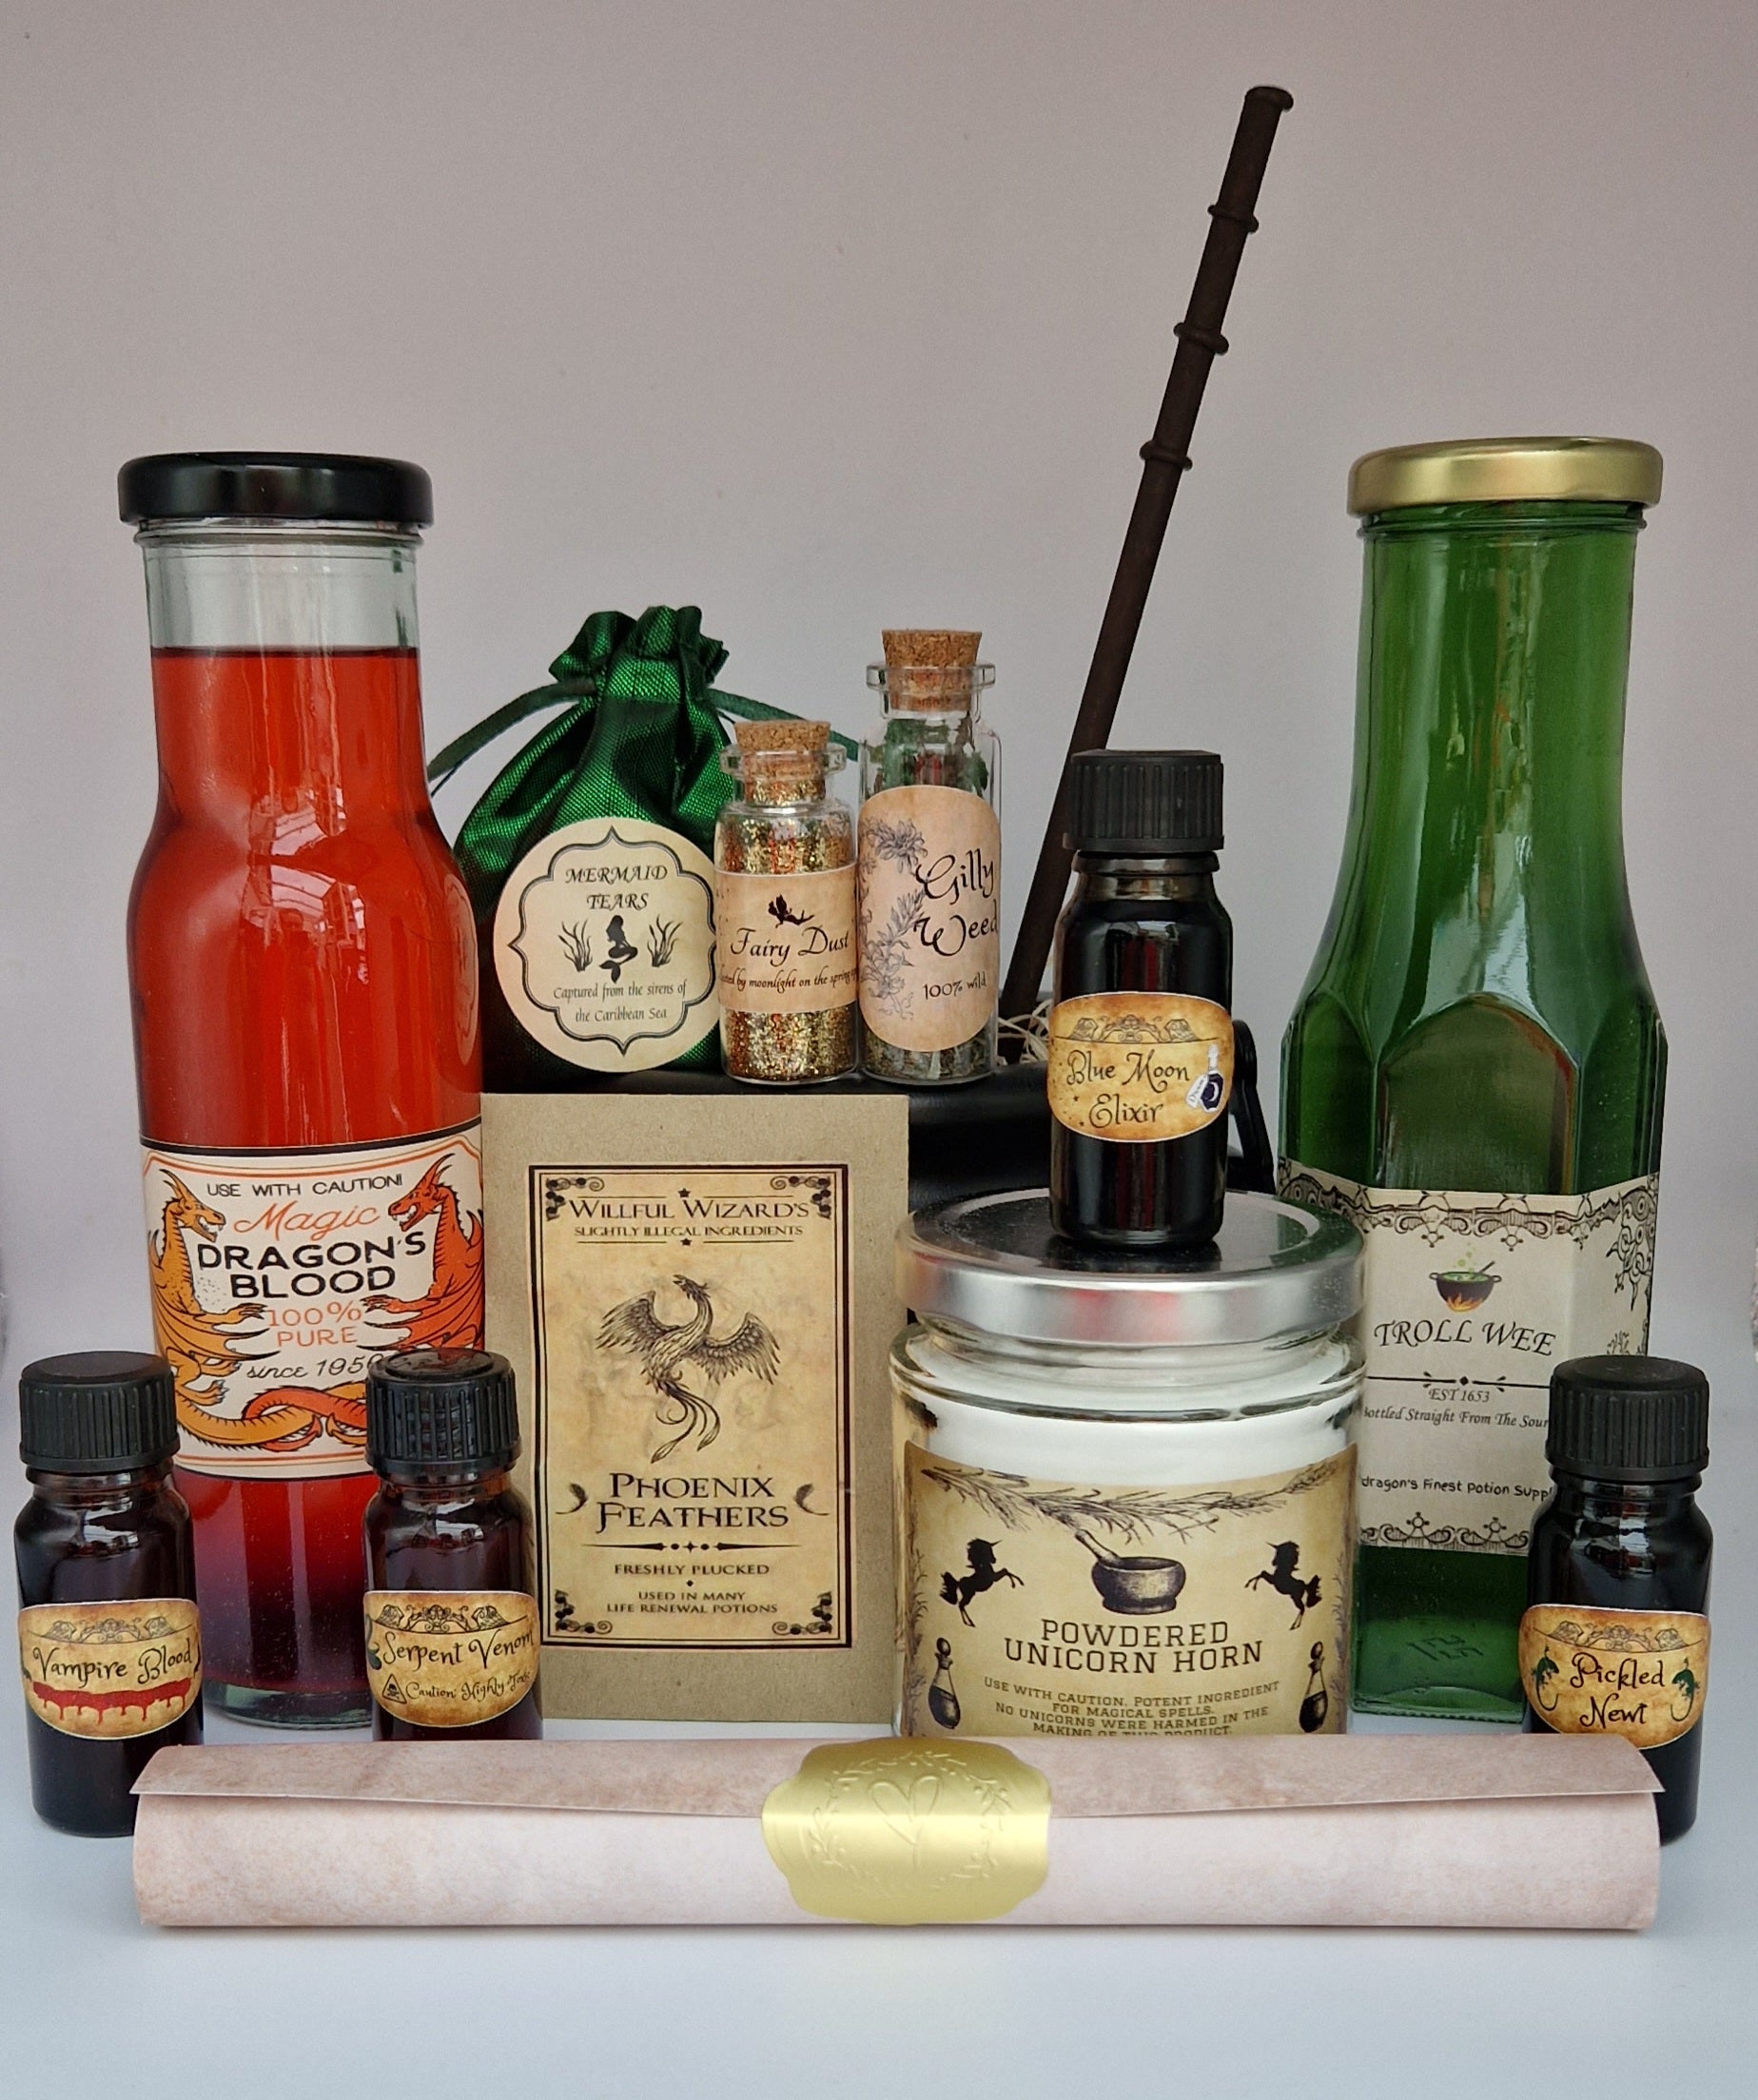 The Potion Lab: Children's Magical Potion Kits – The Potion Lab UK